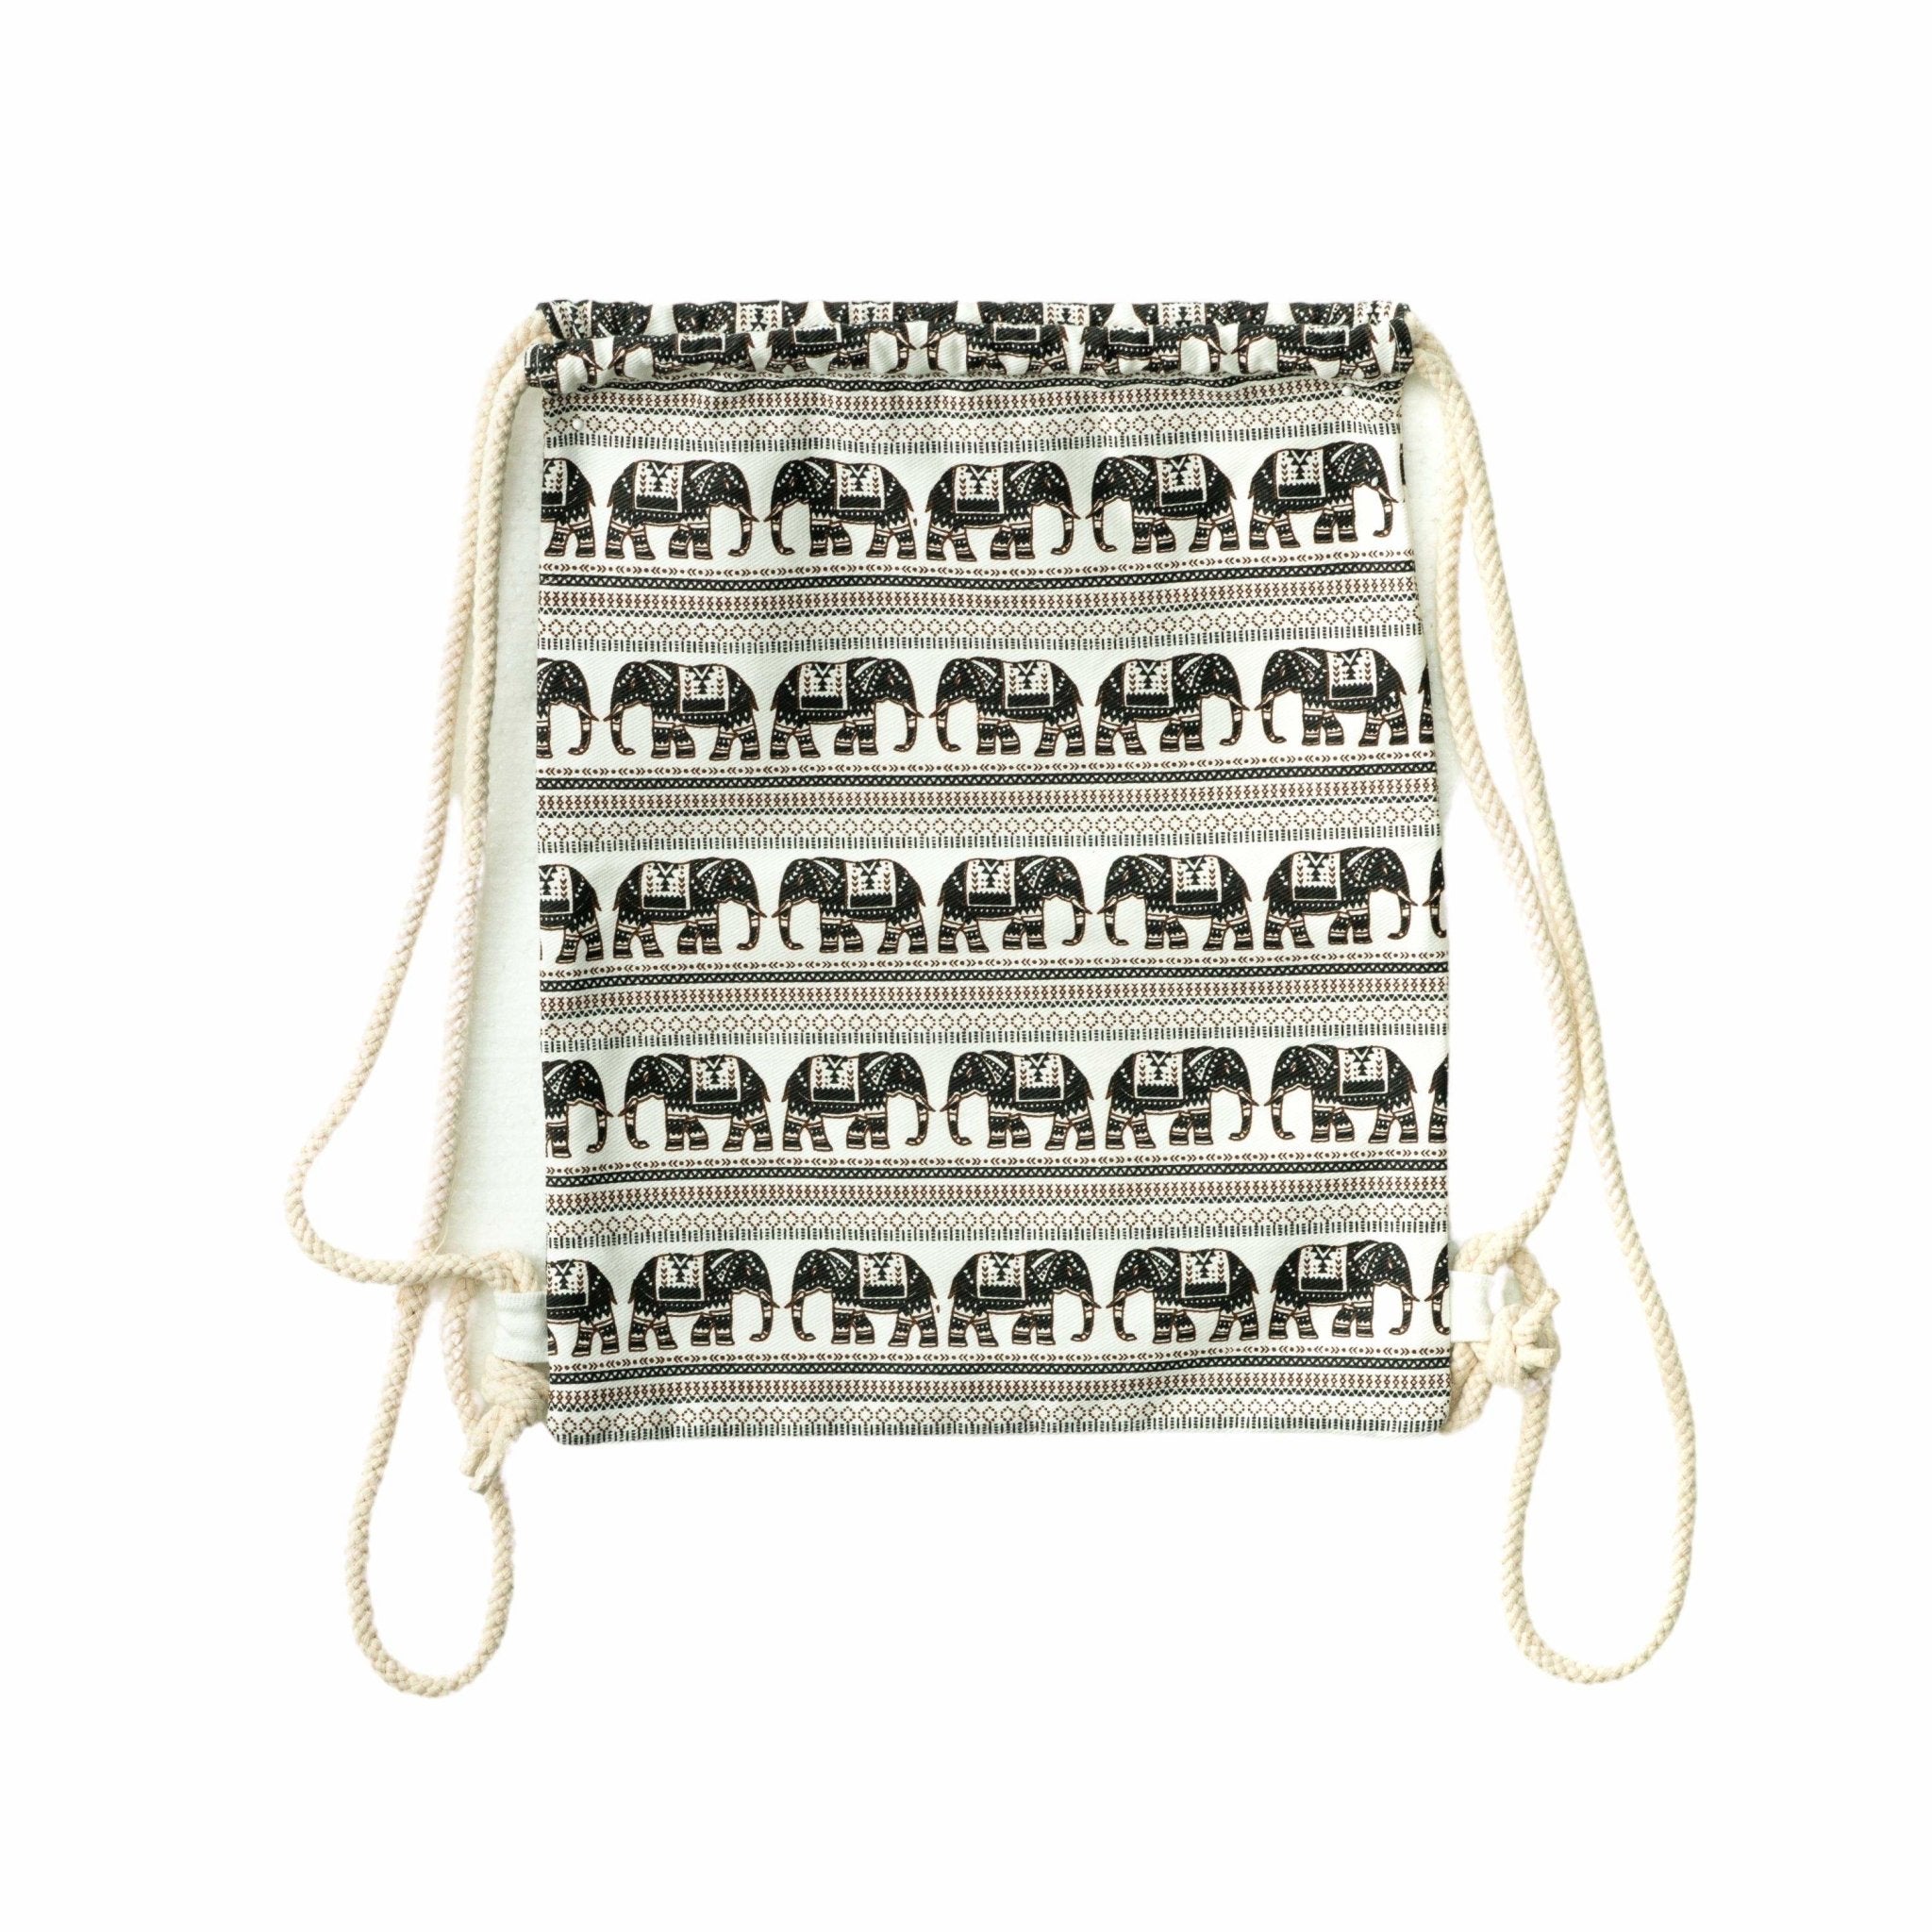 JAIPUR DRAWSTRING BACKPACK Elepanta Backpacks - Buy Today Elephant Pants Jewelry And Bohemian Clothes Handmade In Thailand Help To Save The Elephants FairTrade And Vegan